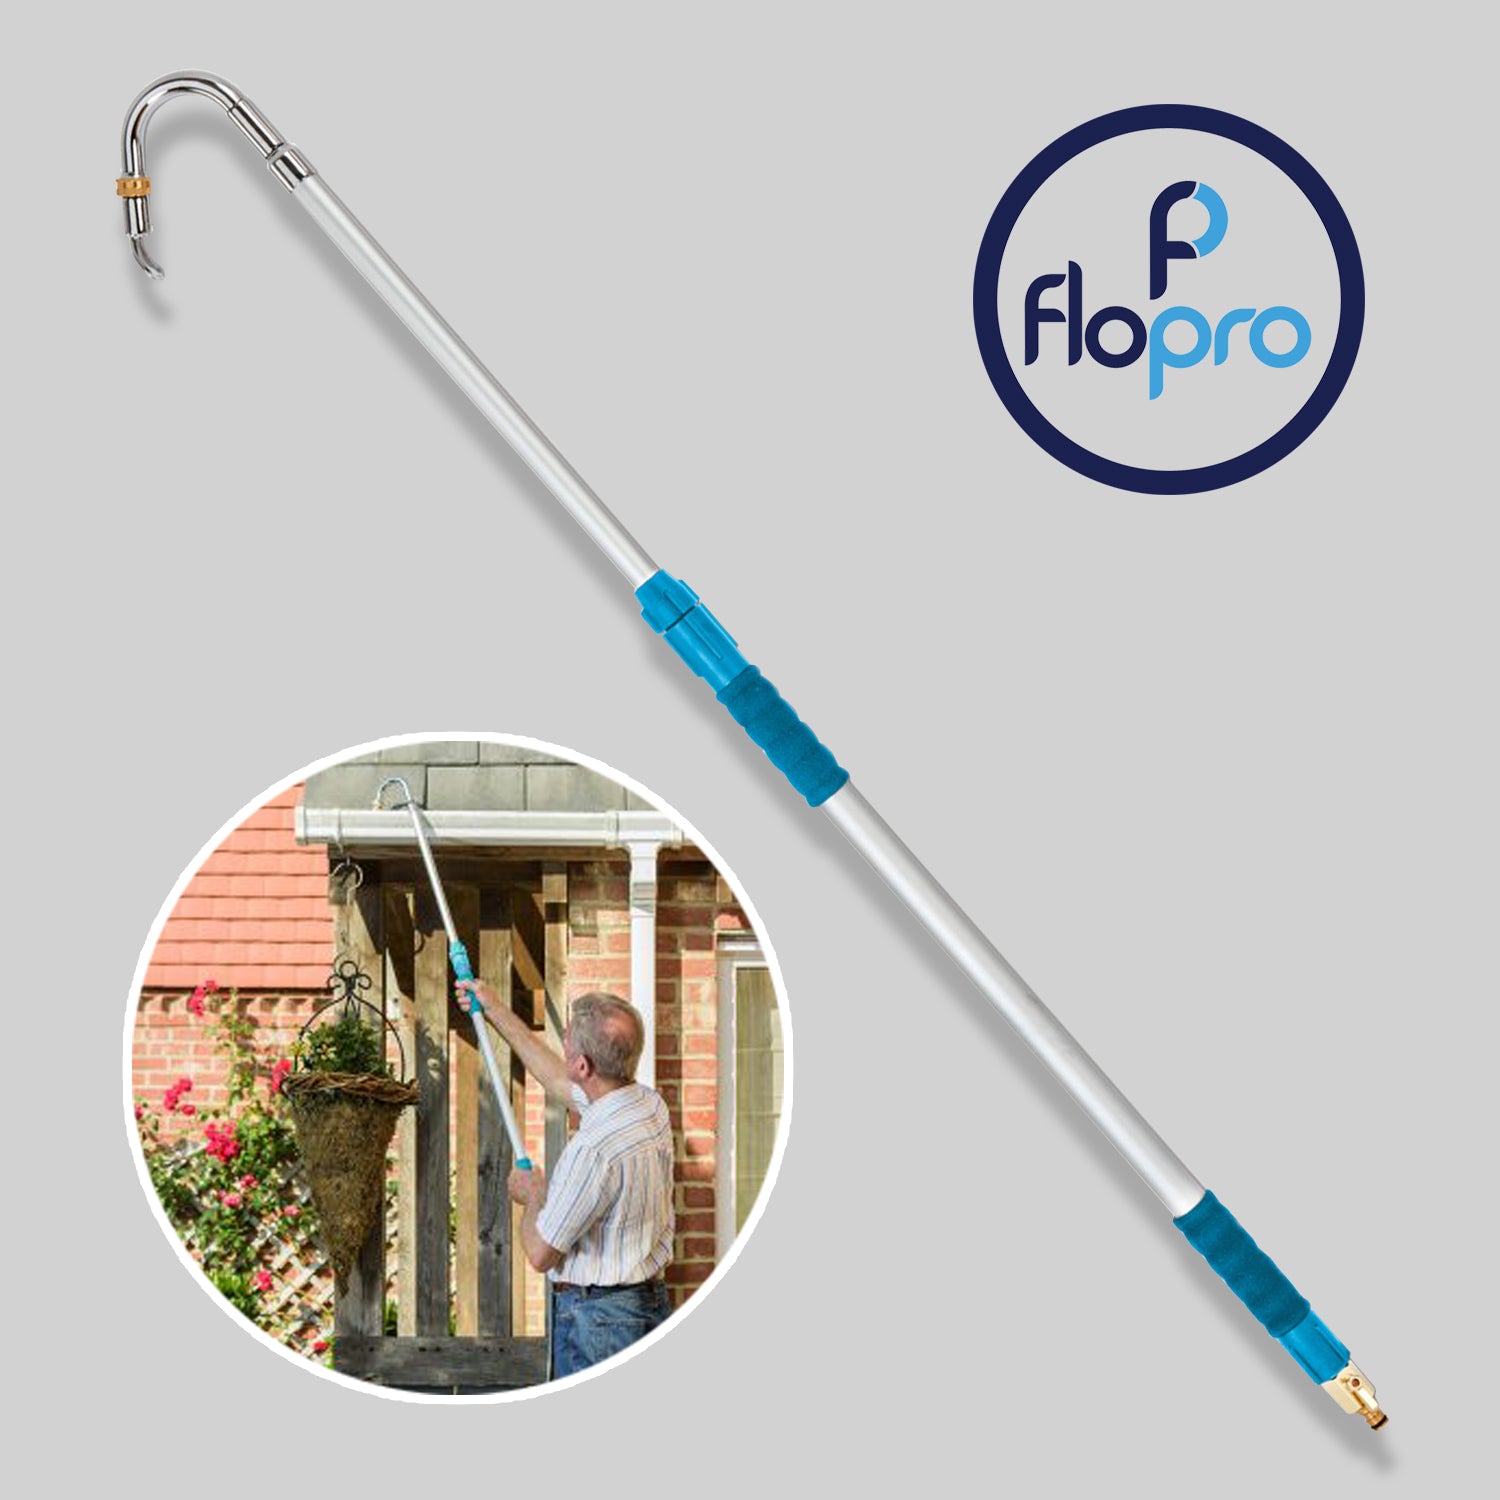 Telescopic Gutter Cleaner by Flopro, sold by In-Excess